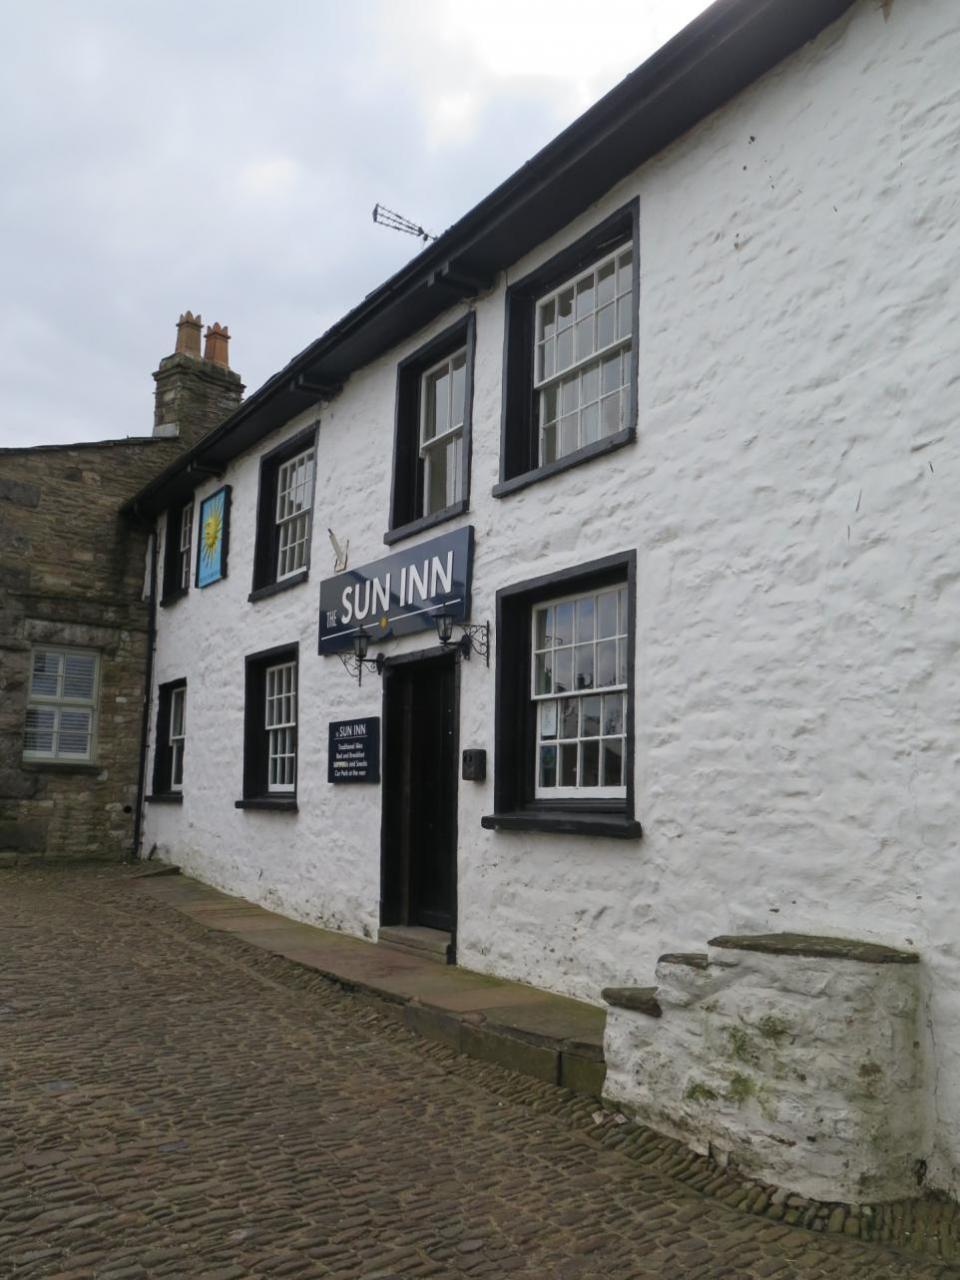 Craven Herald: The community of Dentdale is planning a buy-out of its pub, The Sun Inn.